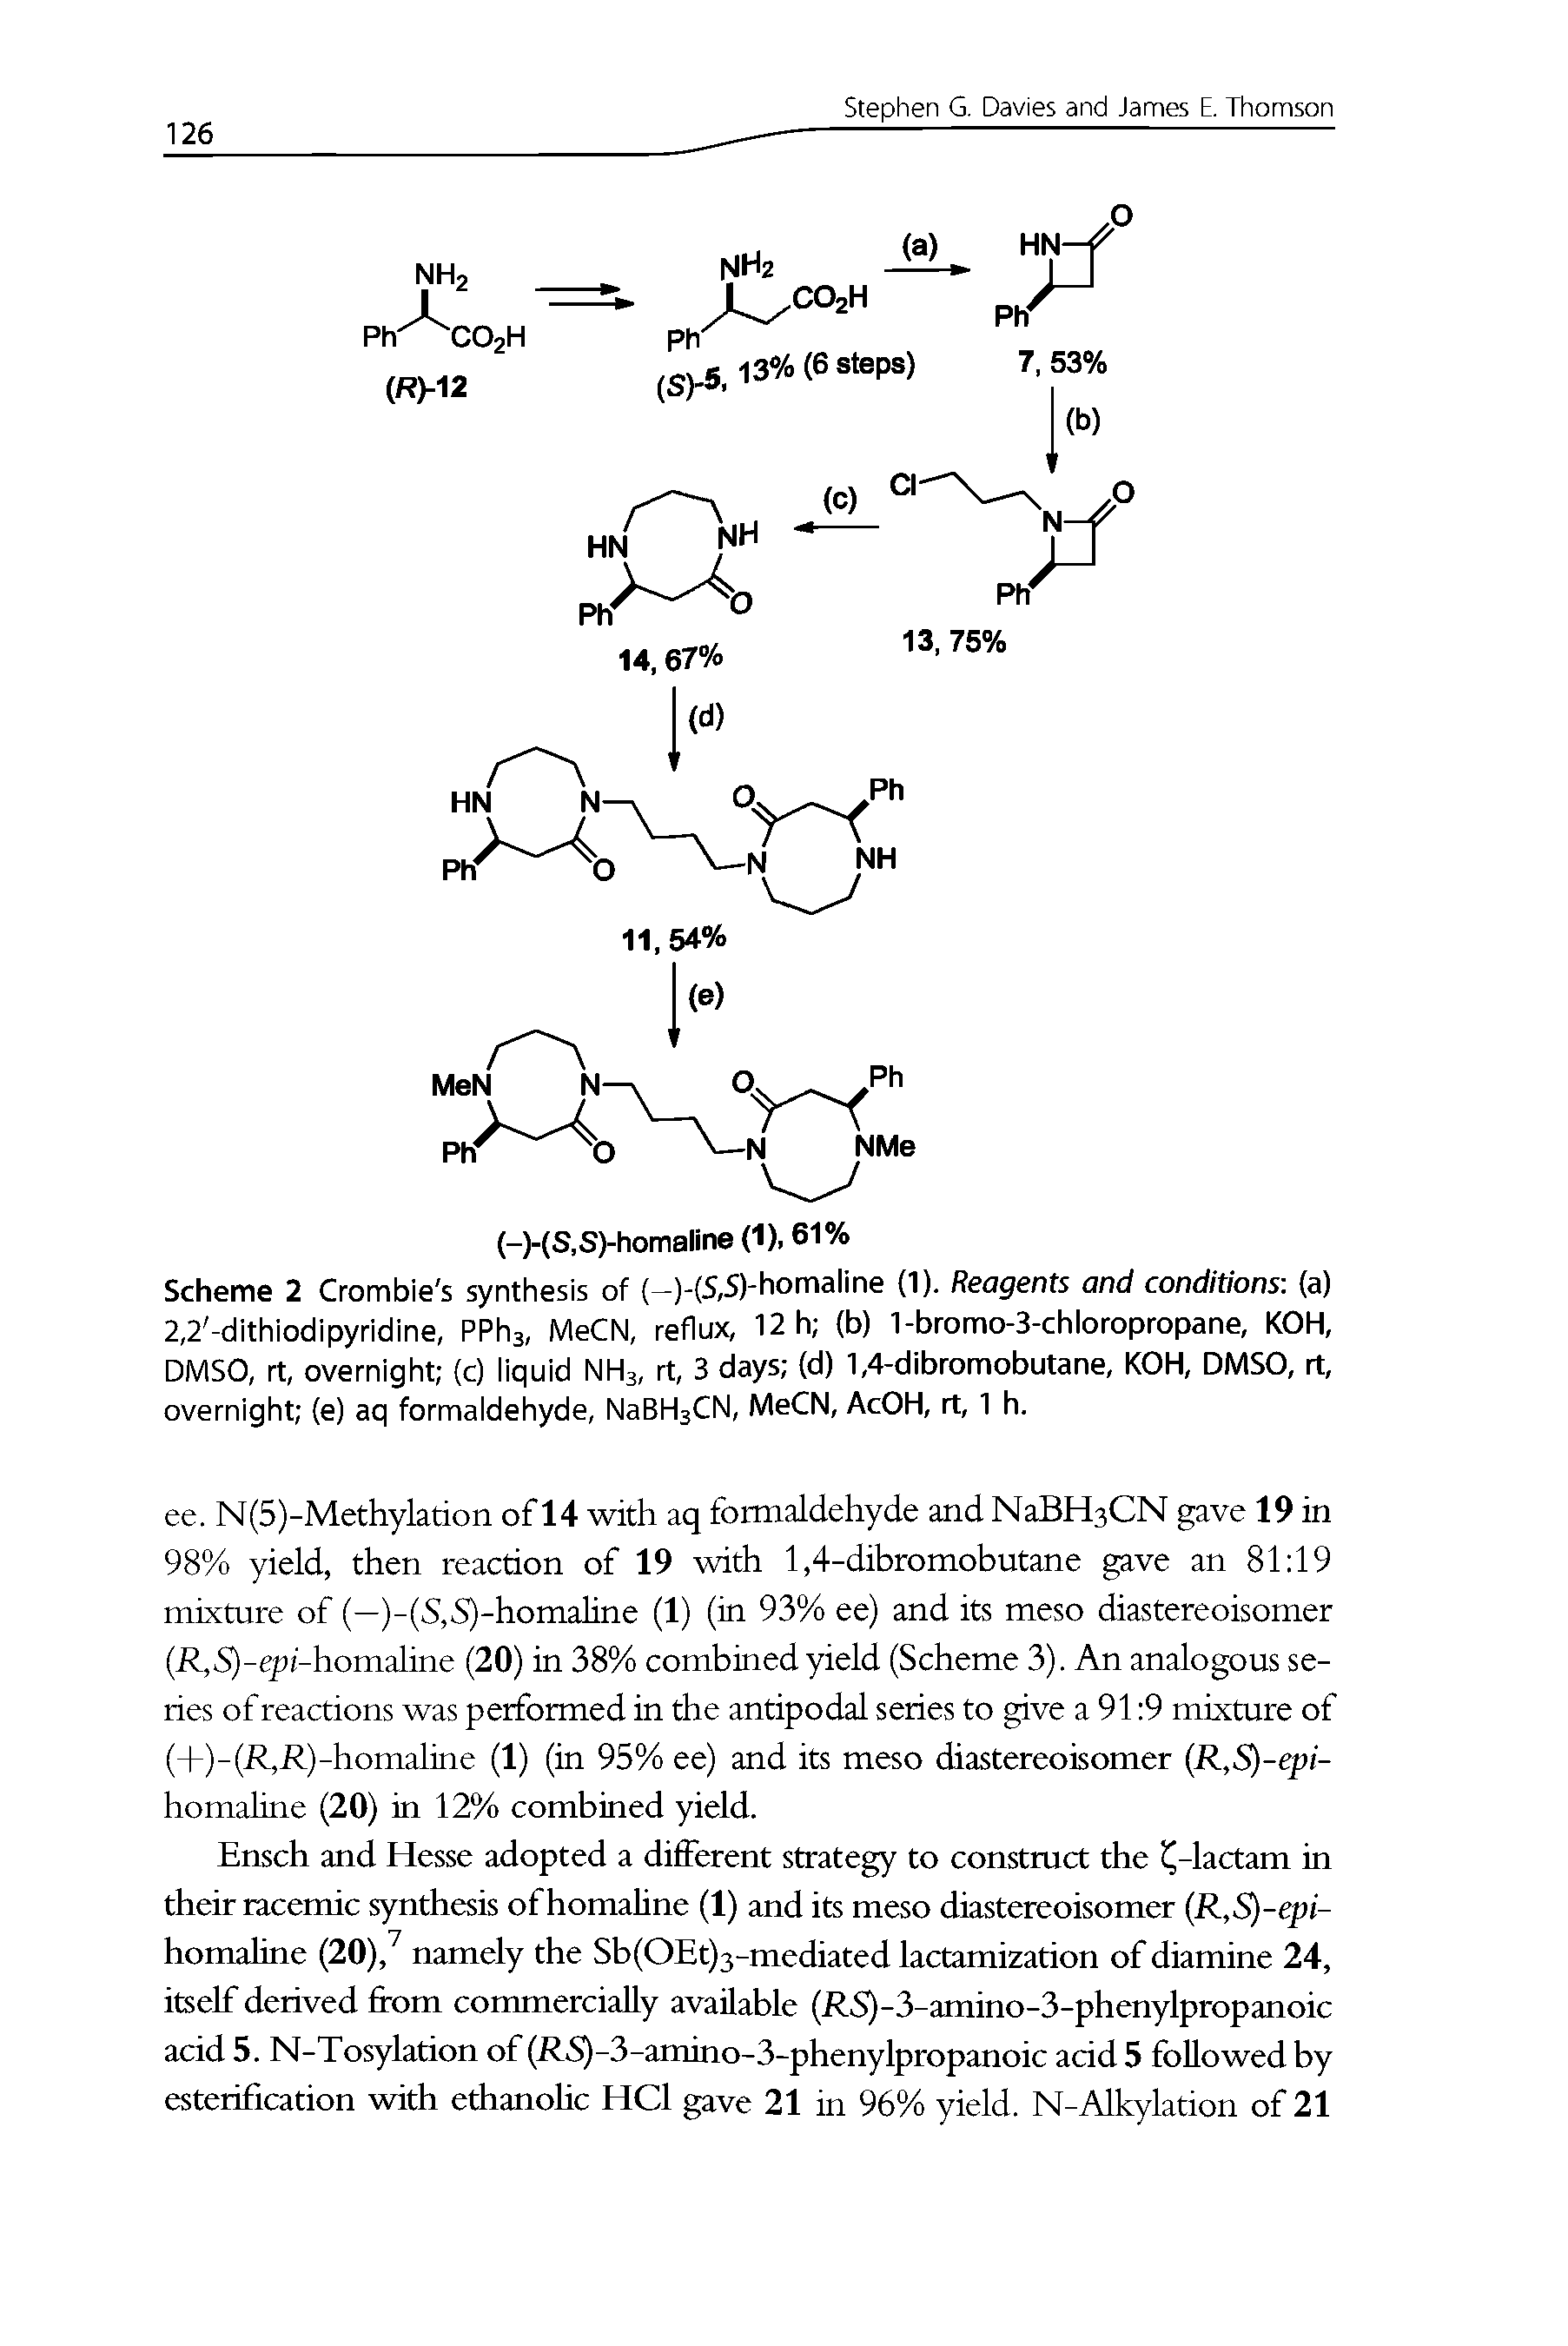 Scheme 2 Crombie s synthesis of -)-(S,S)-homaline (1). Reagents and conditions (a) 2,2 -clithiodipyridine, PPhs, MeCN, reflux, 12 h (b) 1-bromo-3-chloropropane, KOH, DMSO, rt, overnight (c) liquid NH3, rt, 3 days (d) 1,4-dibromobutane, KOH, DMSO, rt, overnight (e) aq formaldehyde, NaBHsCN, MeCN, AcOH, rt, 1 h.